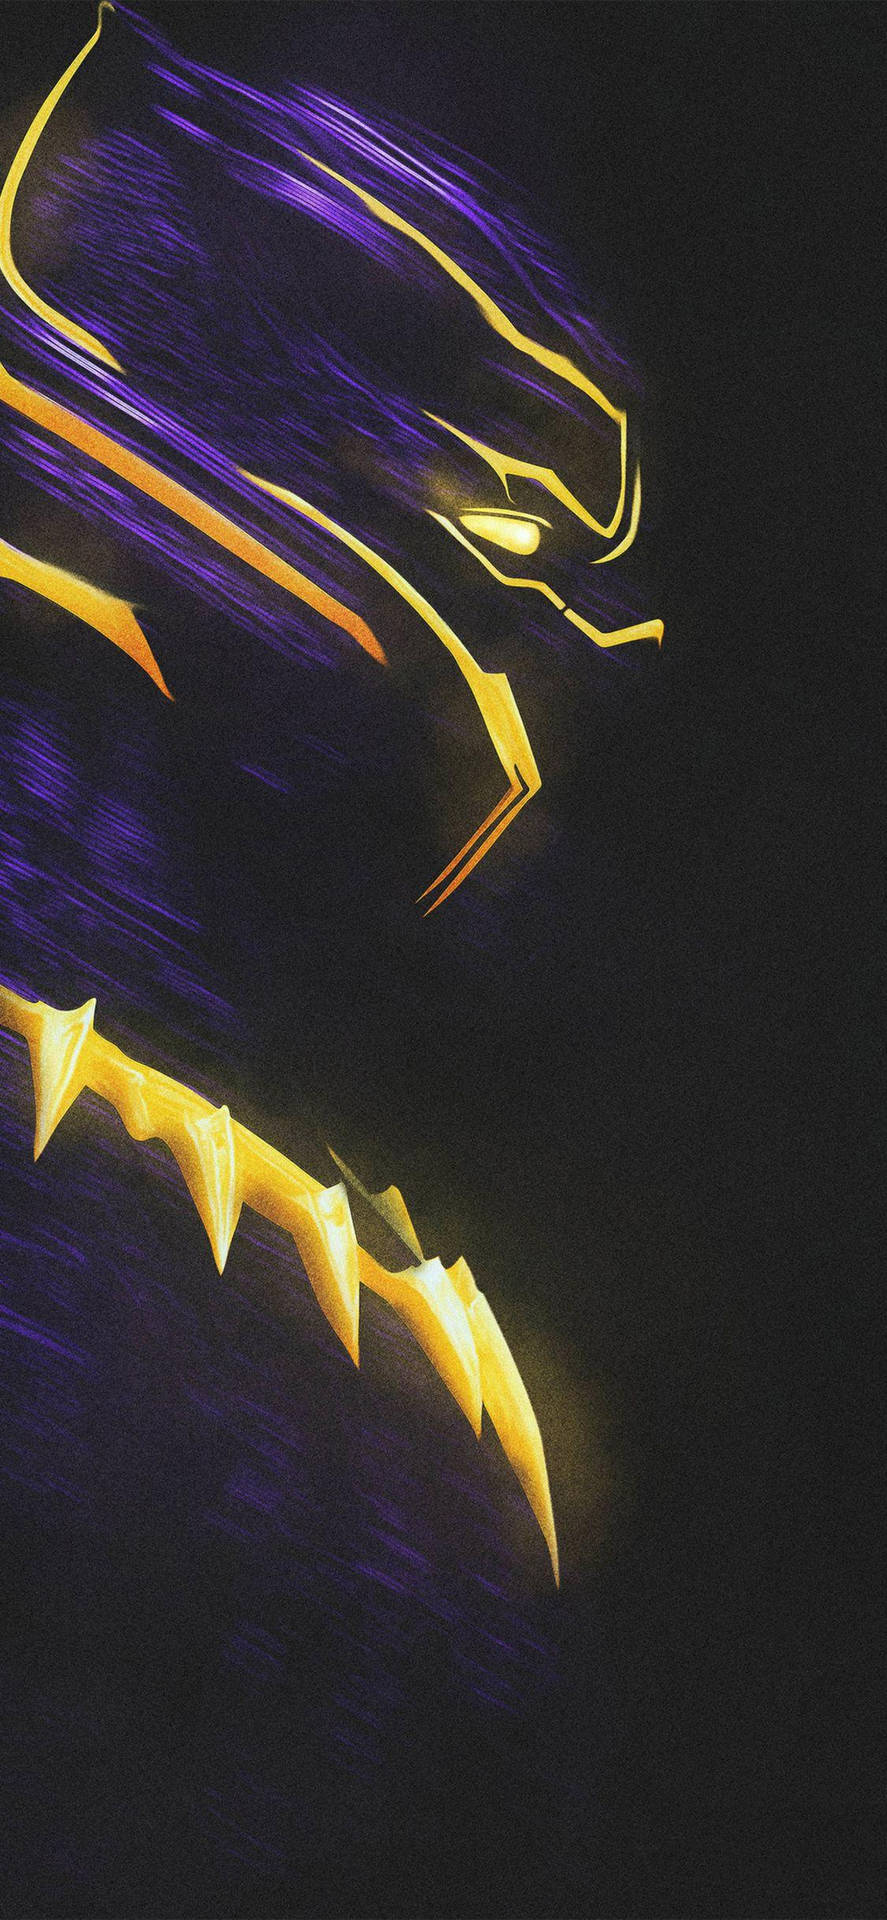 Black Panther Yellow Electric Marvel Iphone X Background